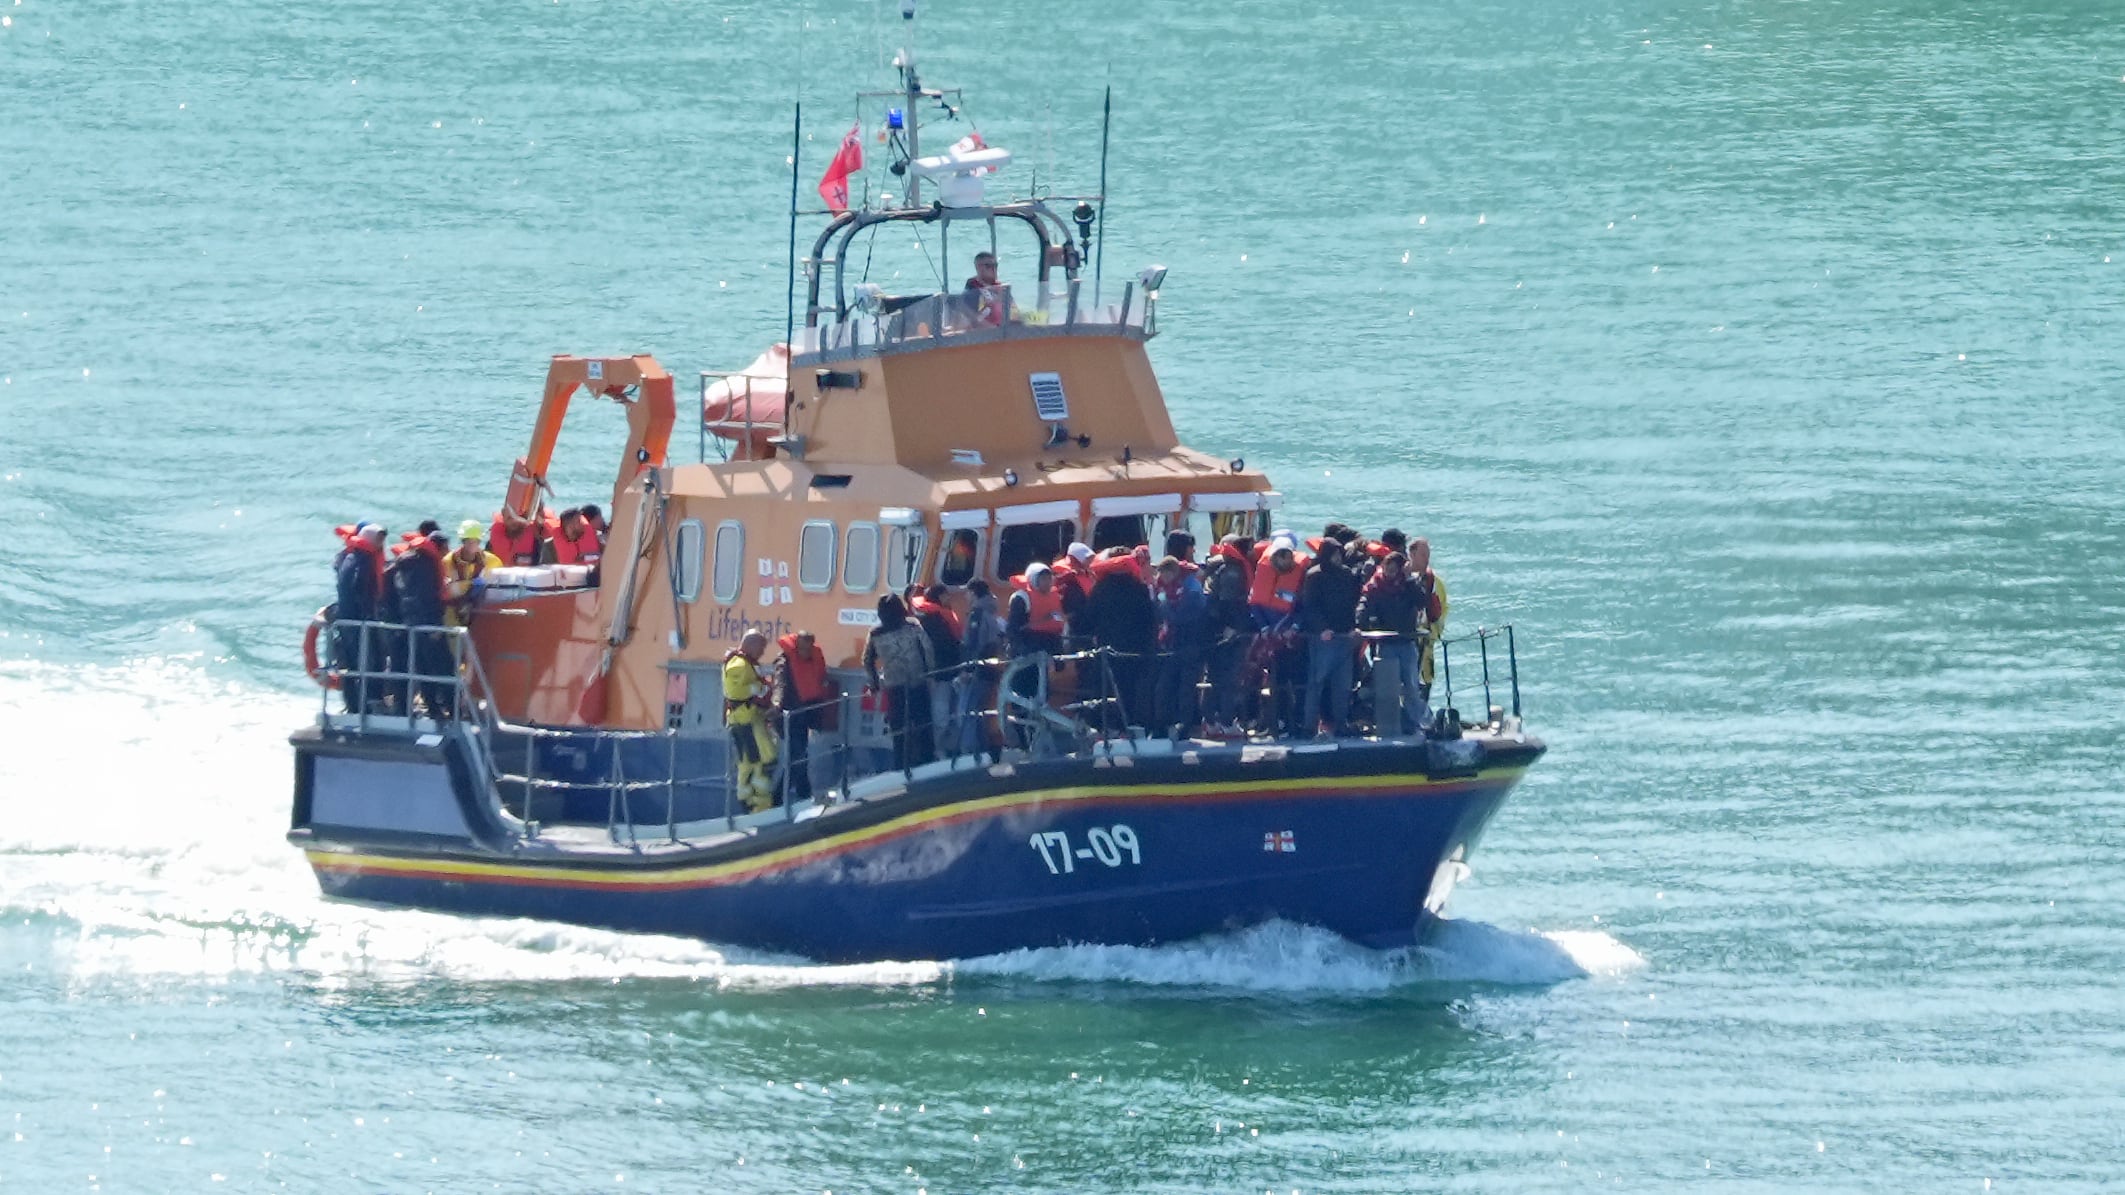 The Home Office said 882 people arrived in the UK after crossing the Channel on small boats on Tuesday